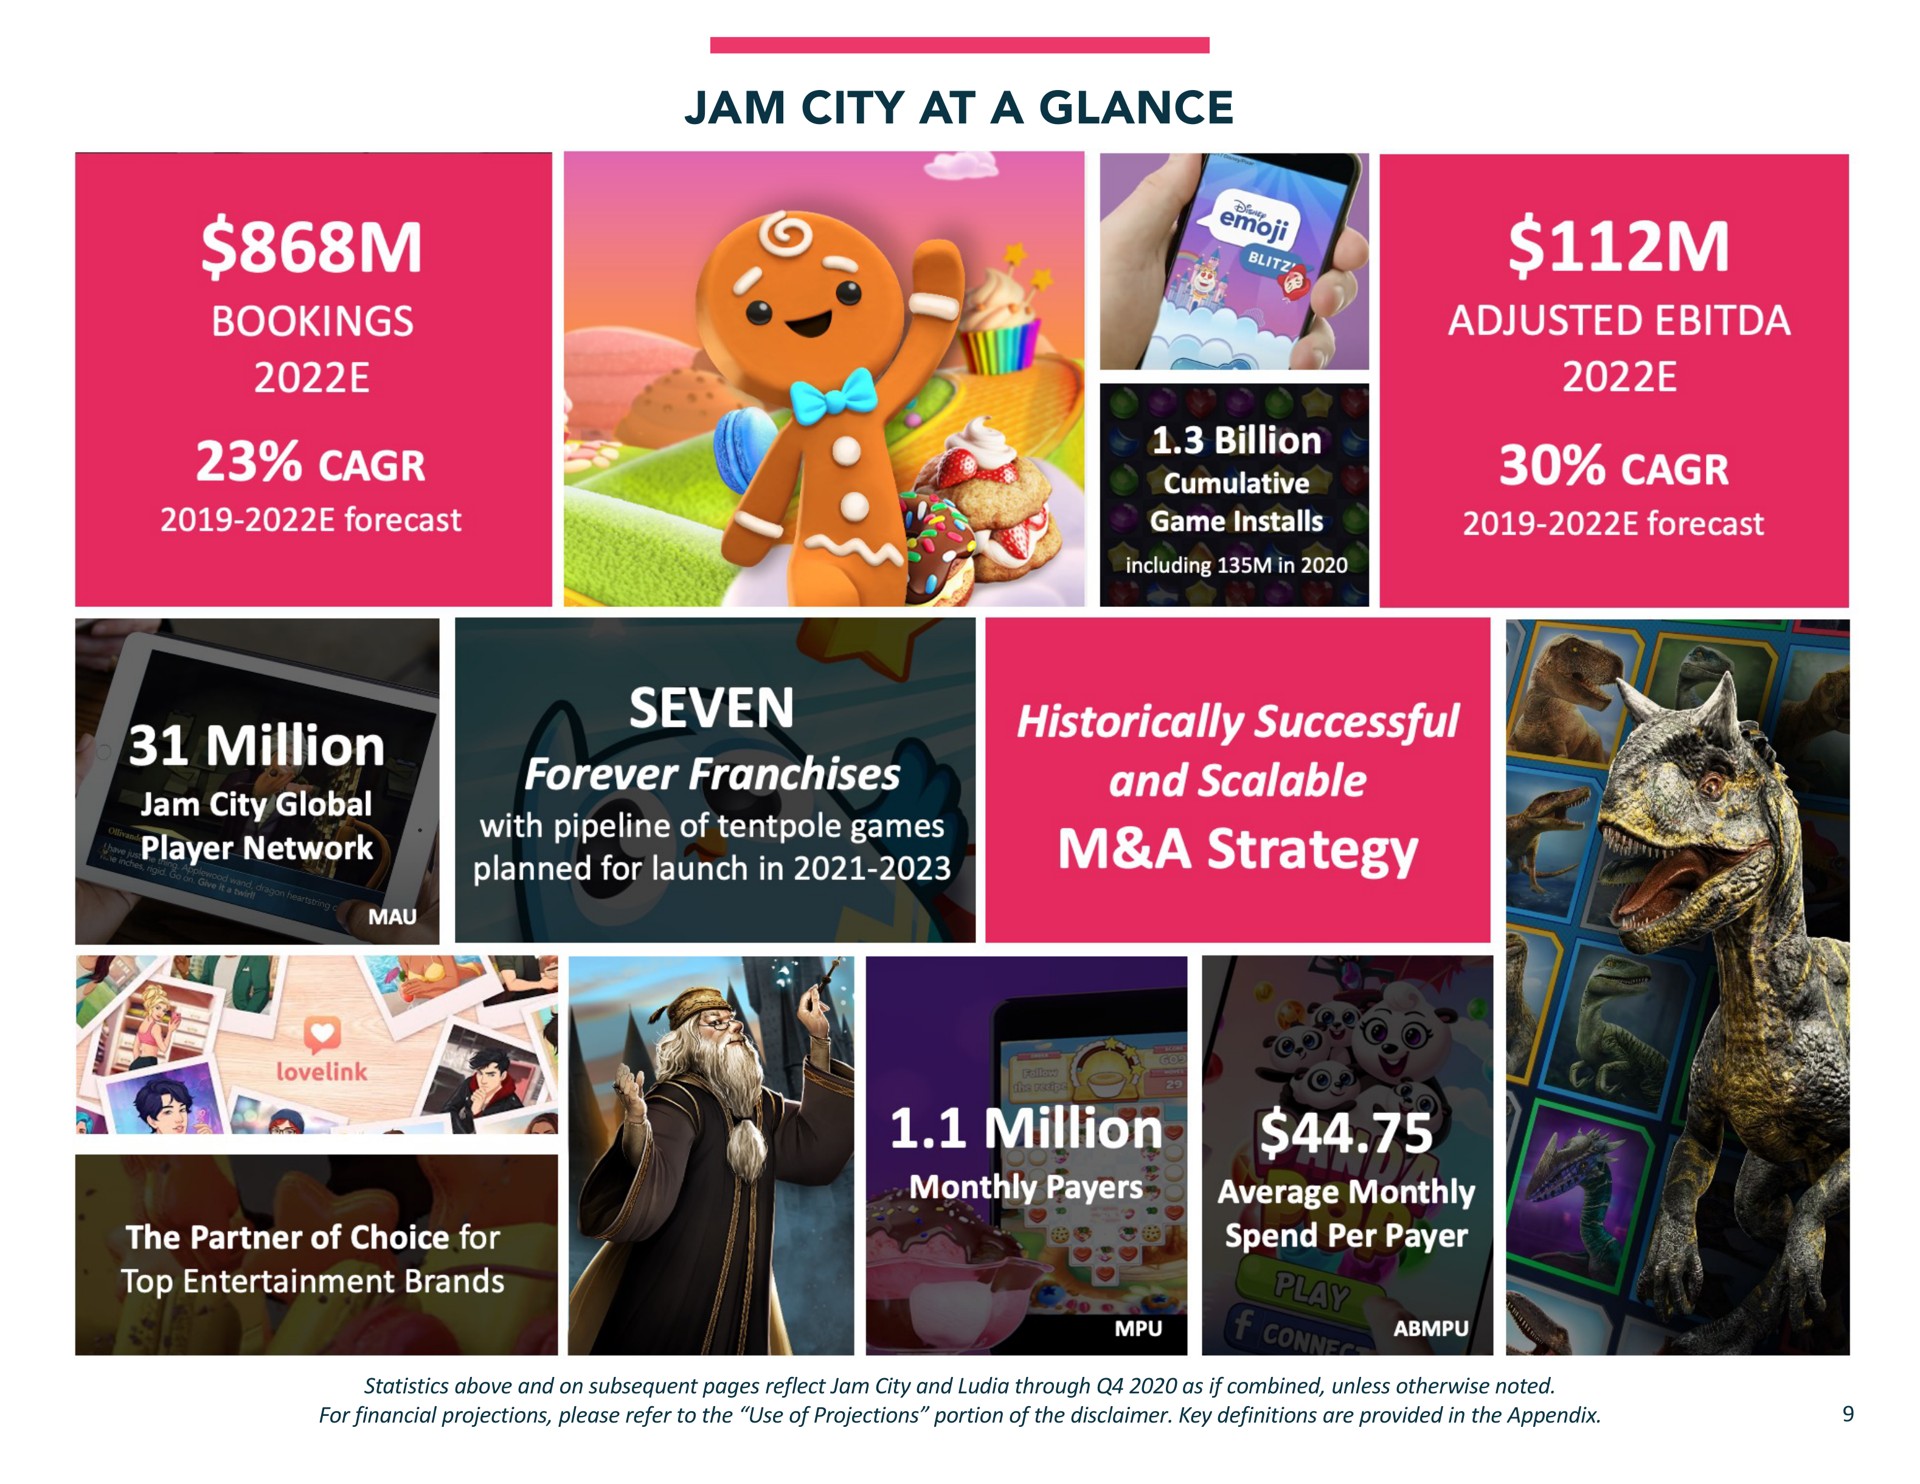 jam city at a glance statistics above and on subsequent pages reflect jam city and through as if combined unless otherwise noted for financial projections please refer to the use of projections portion of the disclaimer key definitions are provided in the appendix bookings aes adjusted i forecast woe game installs forecast million historically successful scalable tay rectal global with pipeline games planned launch million partner choice top entertainment brands average monthly elm elle an | Jam City